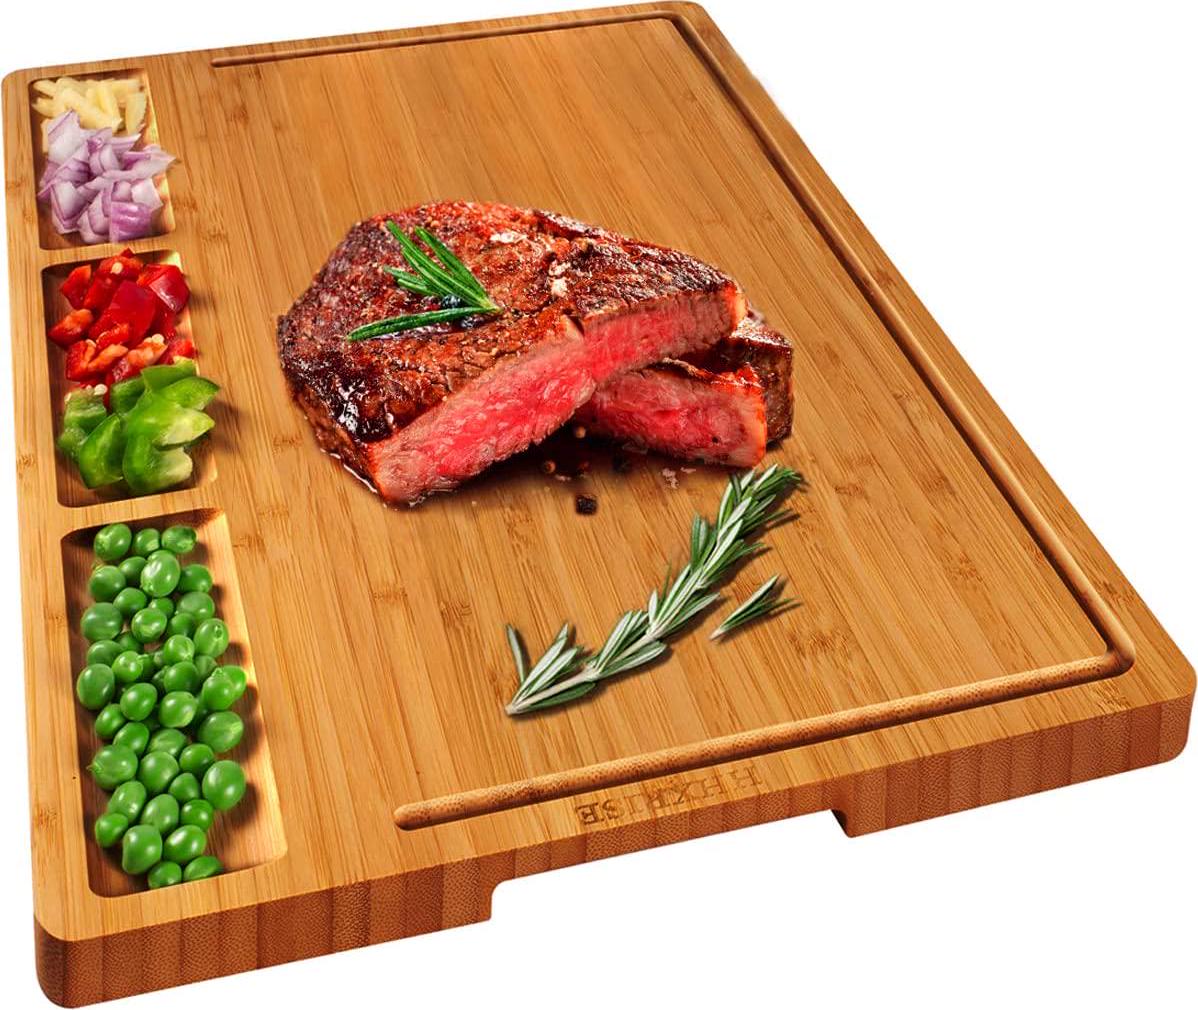 HHXRISE, HHXRISE Large Organic Bamboo Cutting Board for Kitchen with Tray, with 3 Built-in Compartments and Juice Grooves, Heavy Duty Chopping Board Serving Tray, Butcher Block, Carving Board, BPA Free